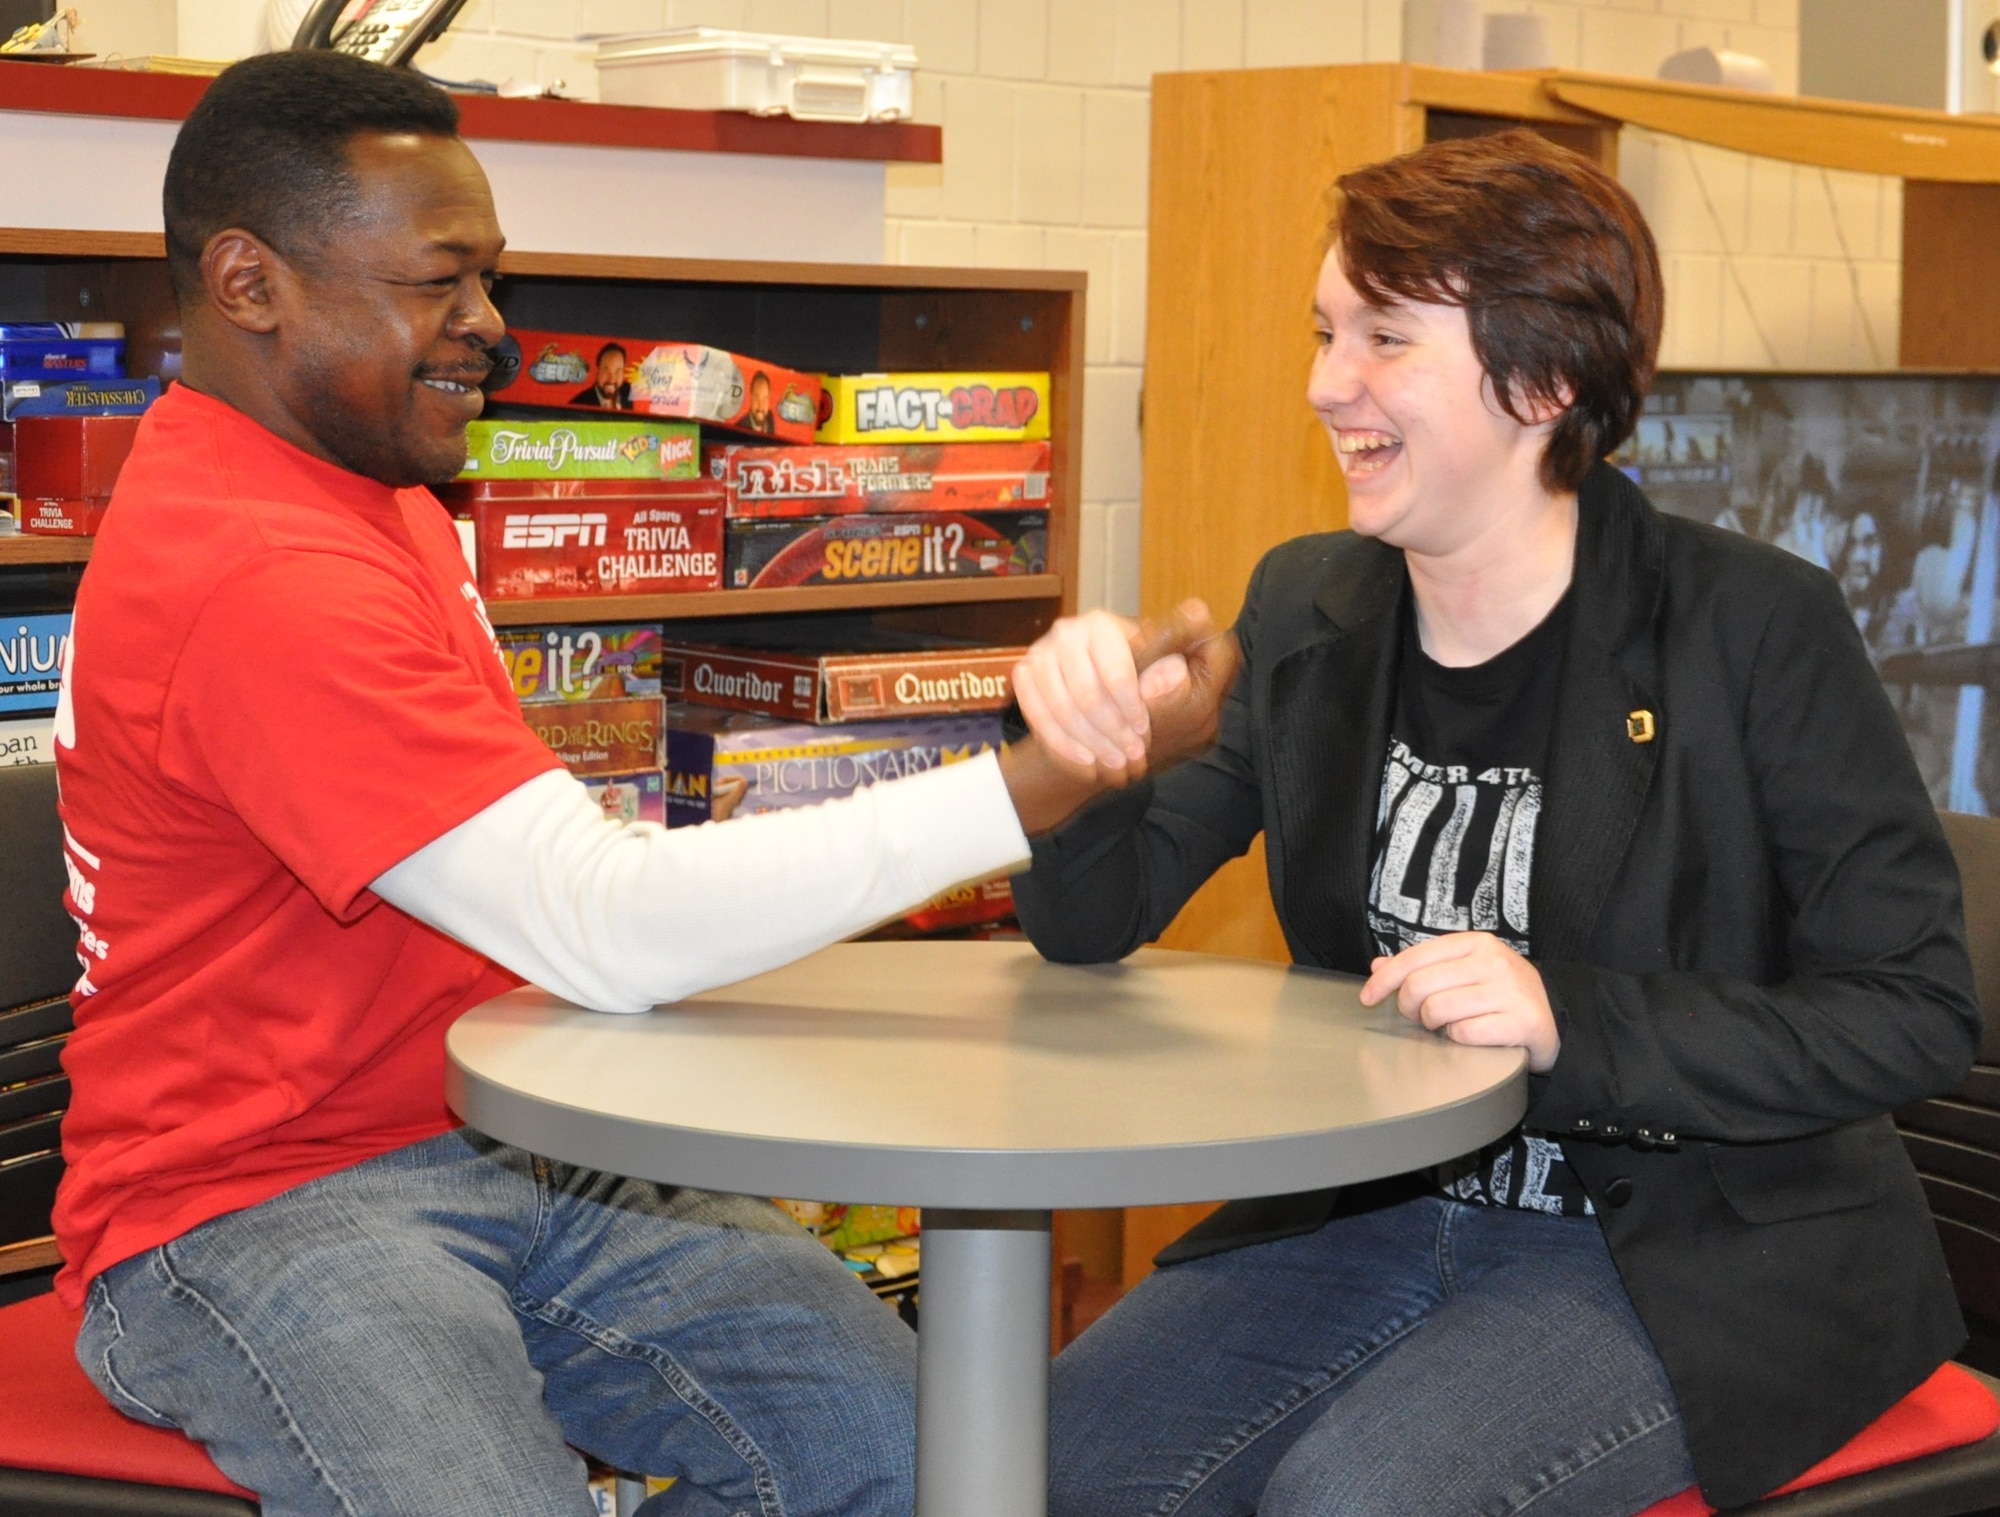 Rowan Goble (right) the Wright-Patterson Air Force Base Candidate for Youth of the Year, and Bennie Luck, the Youth Programs coordinator, arm wrestle at the Prairies Youth Center. (Air Force photo by Gina M. Giardina)